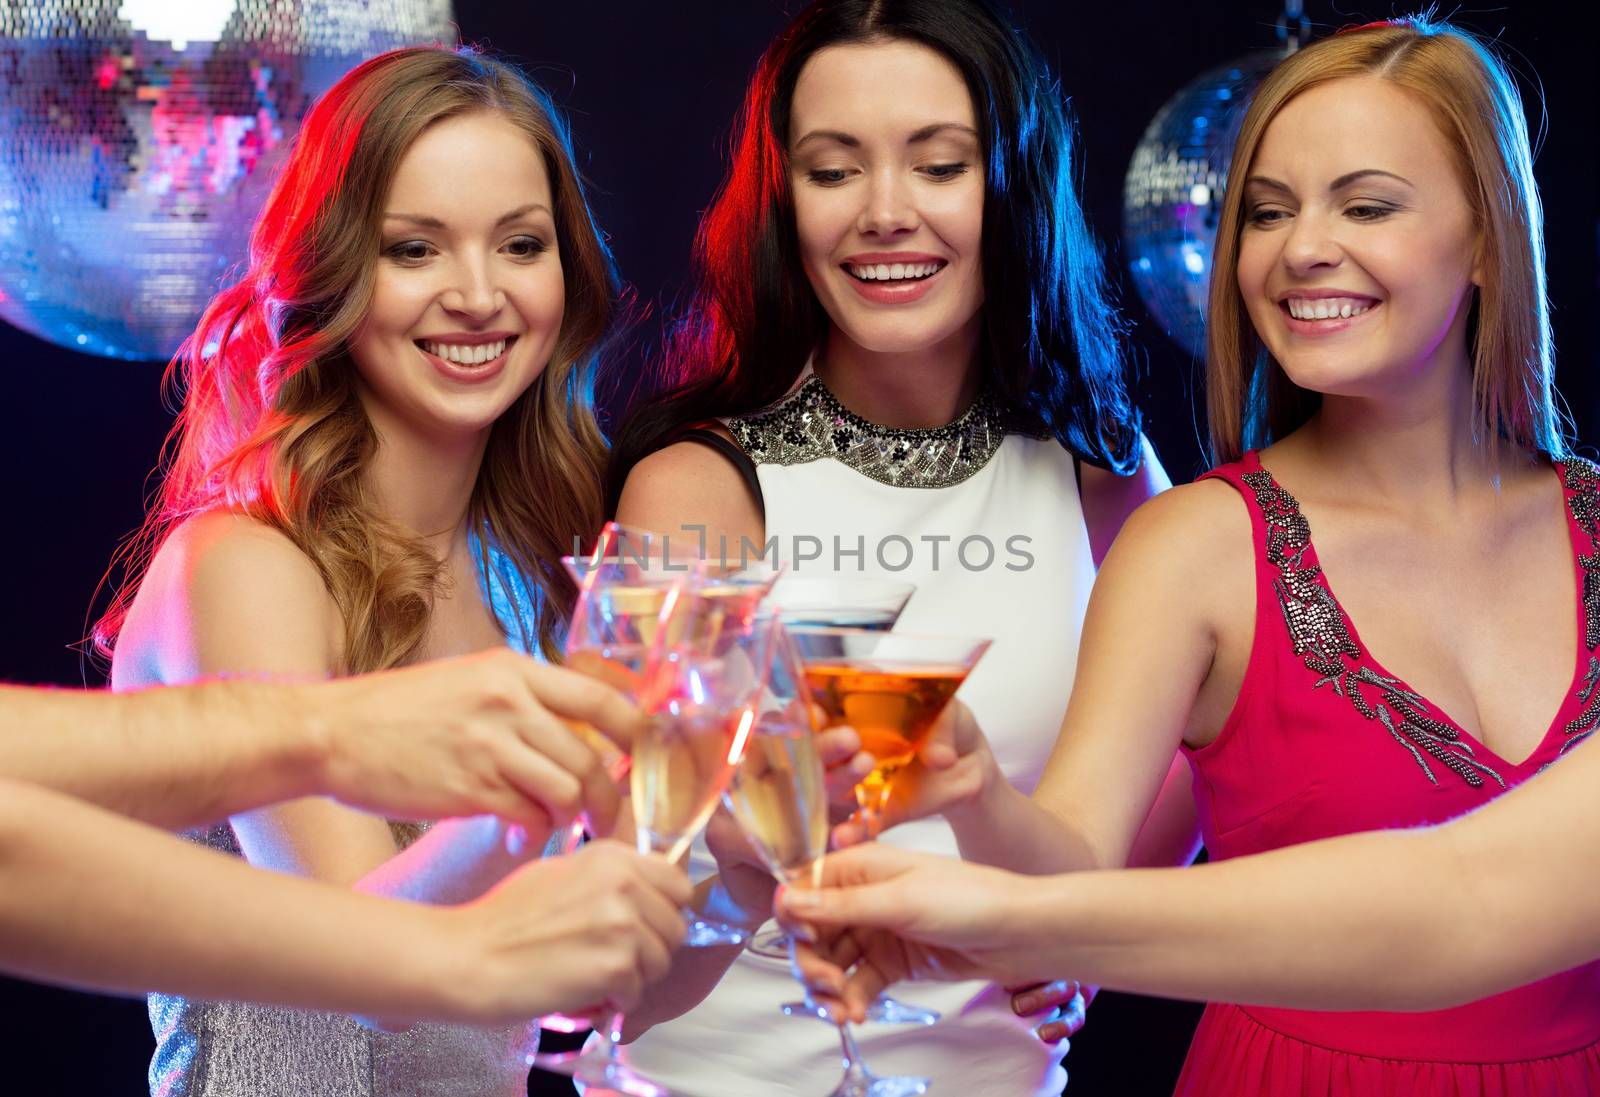 "new year", celebration, friends, bachelorette party, birthday concept - three women in evening dresses with cocktails in club or bar